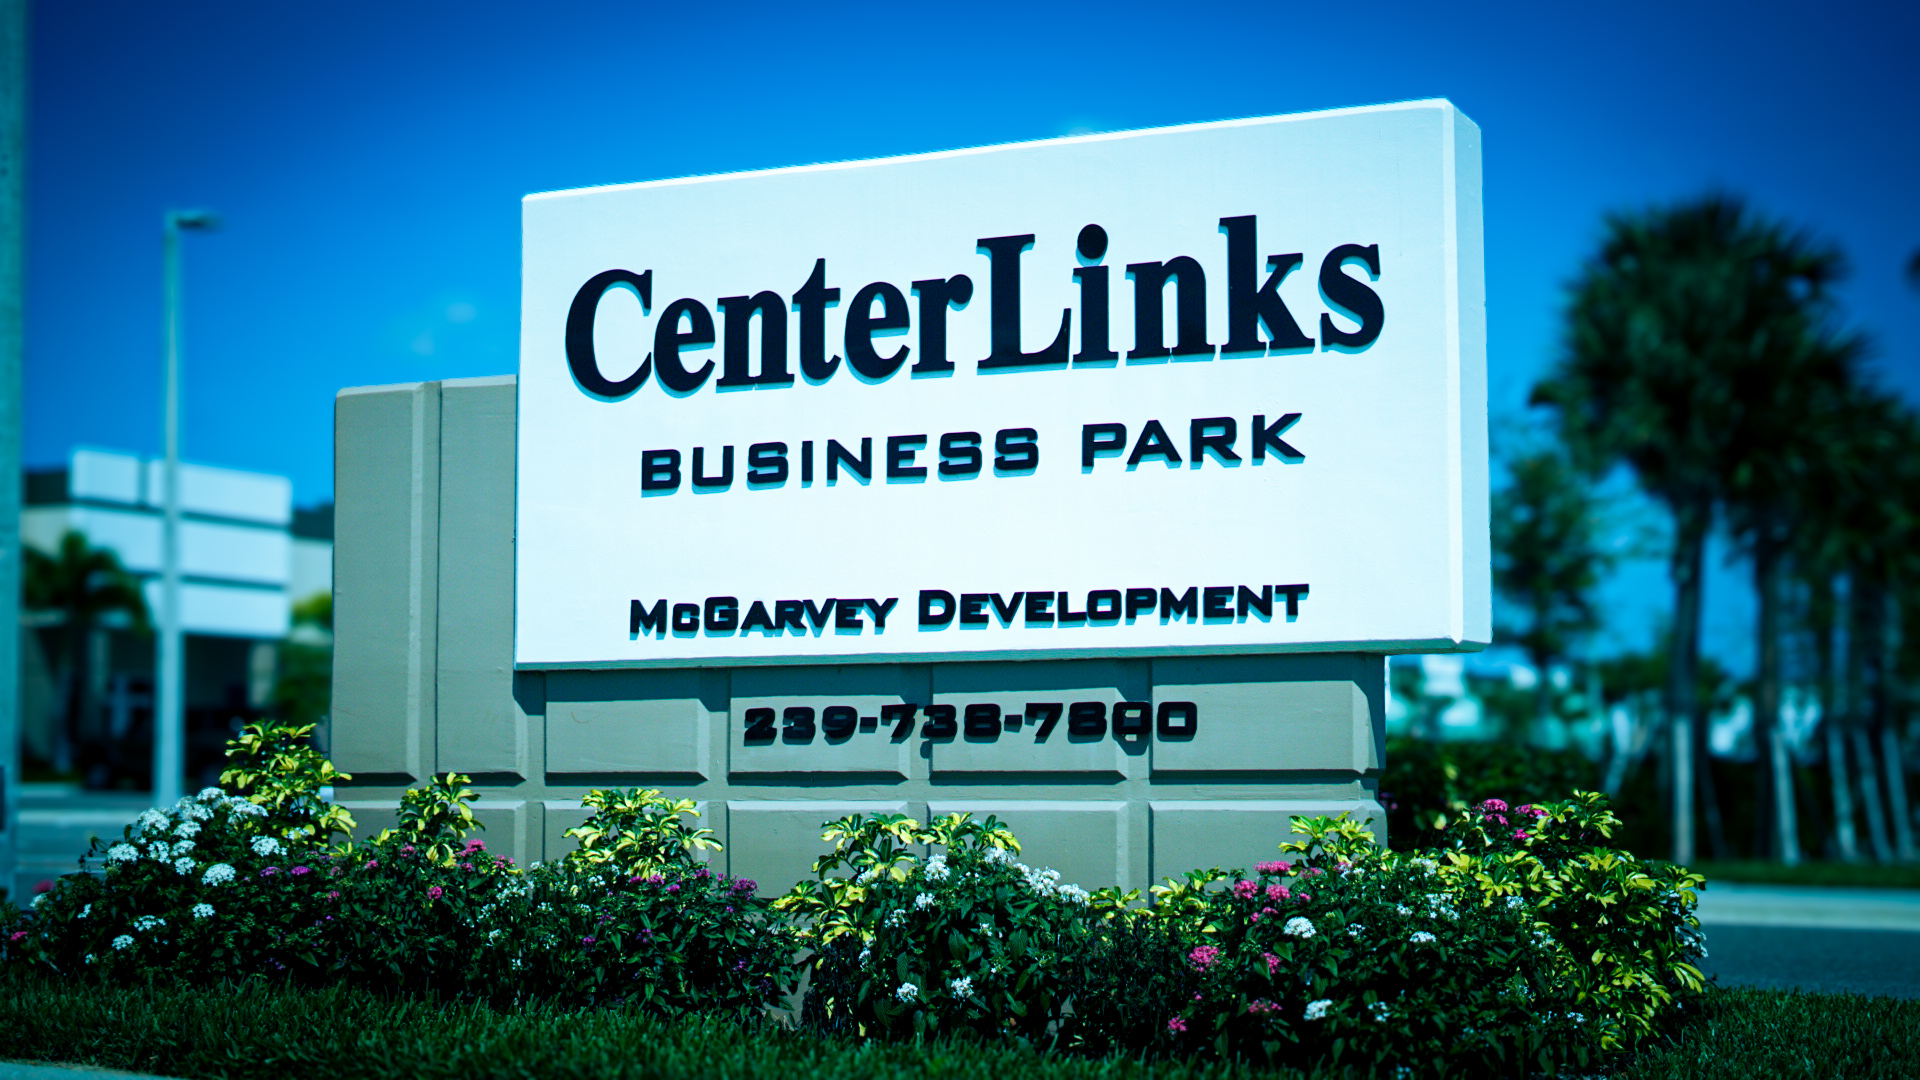 CenterLinks Business Park is acquired for $92.5 million.